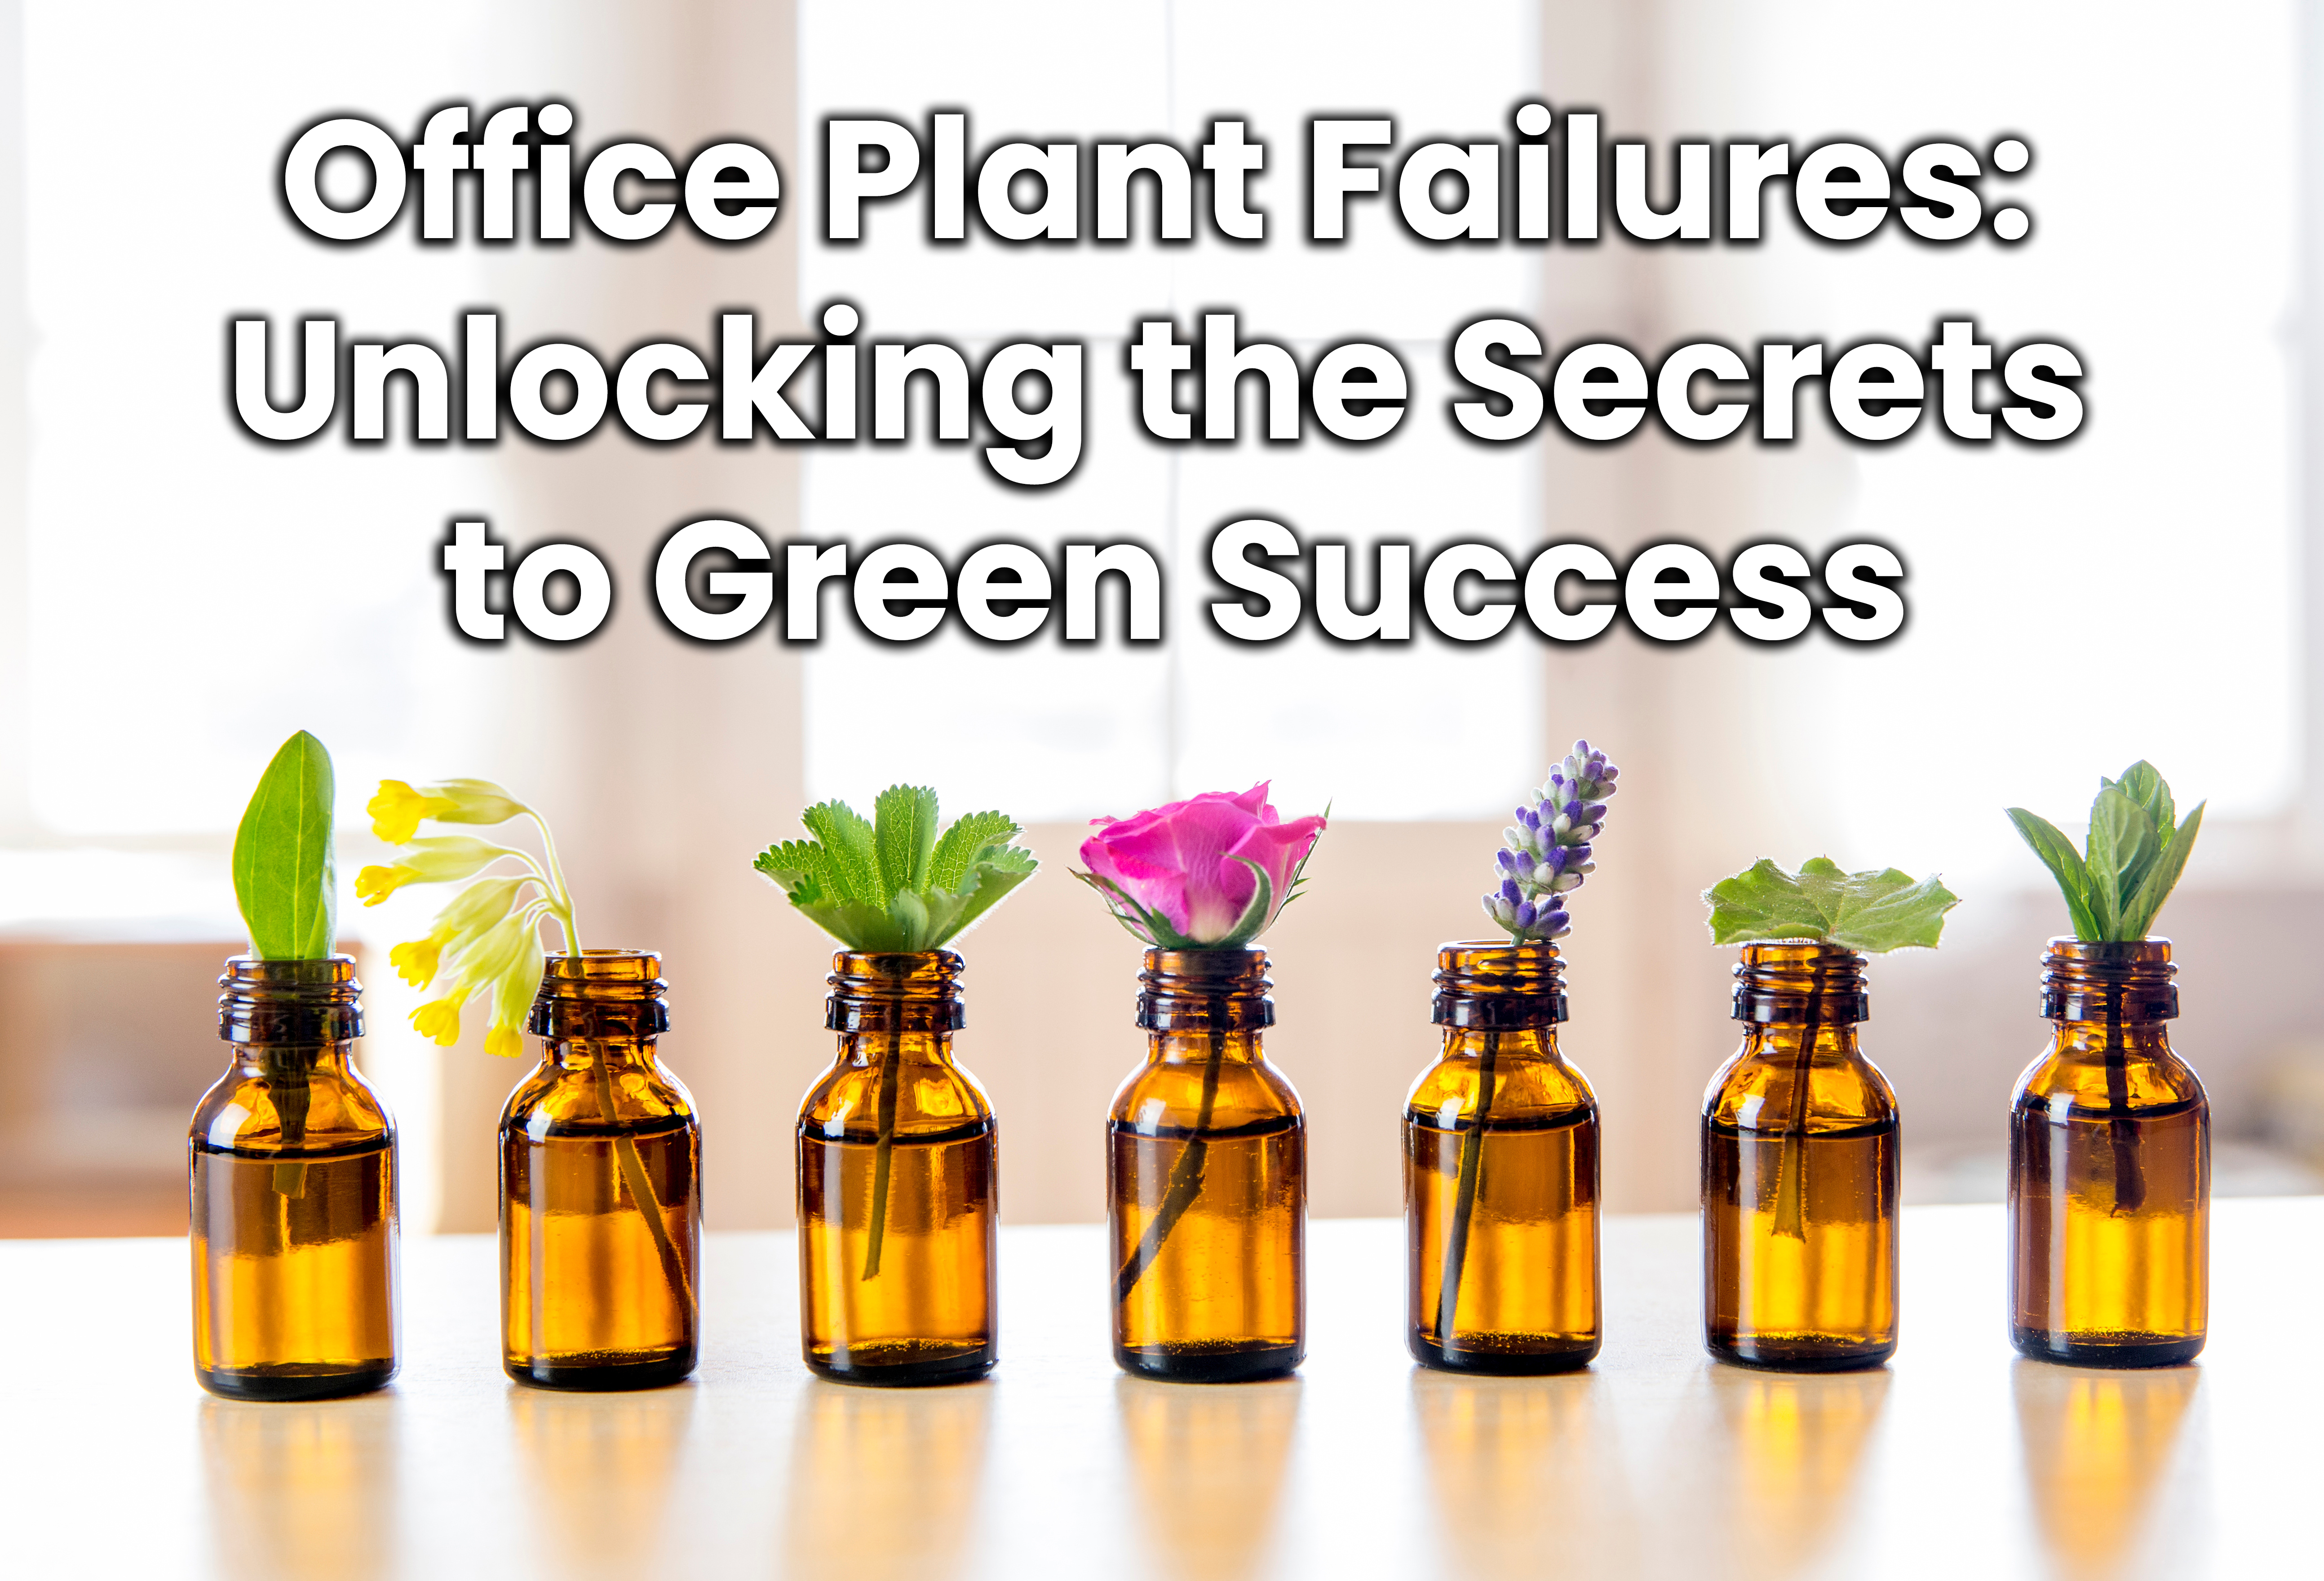 Office Plant Failures: Unlocking the Secrets to Green Success